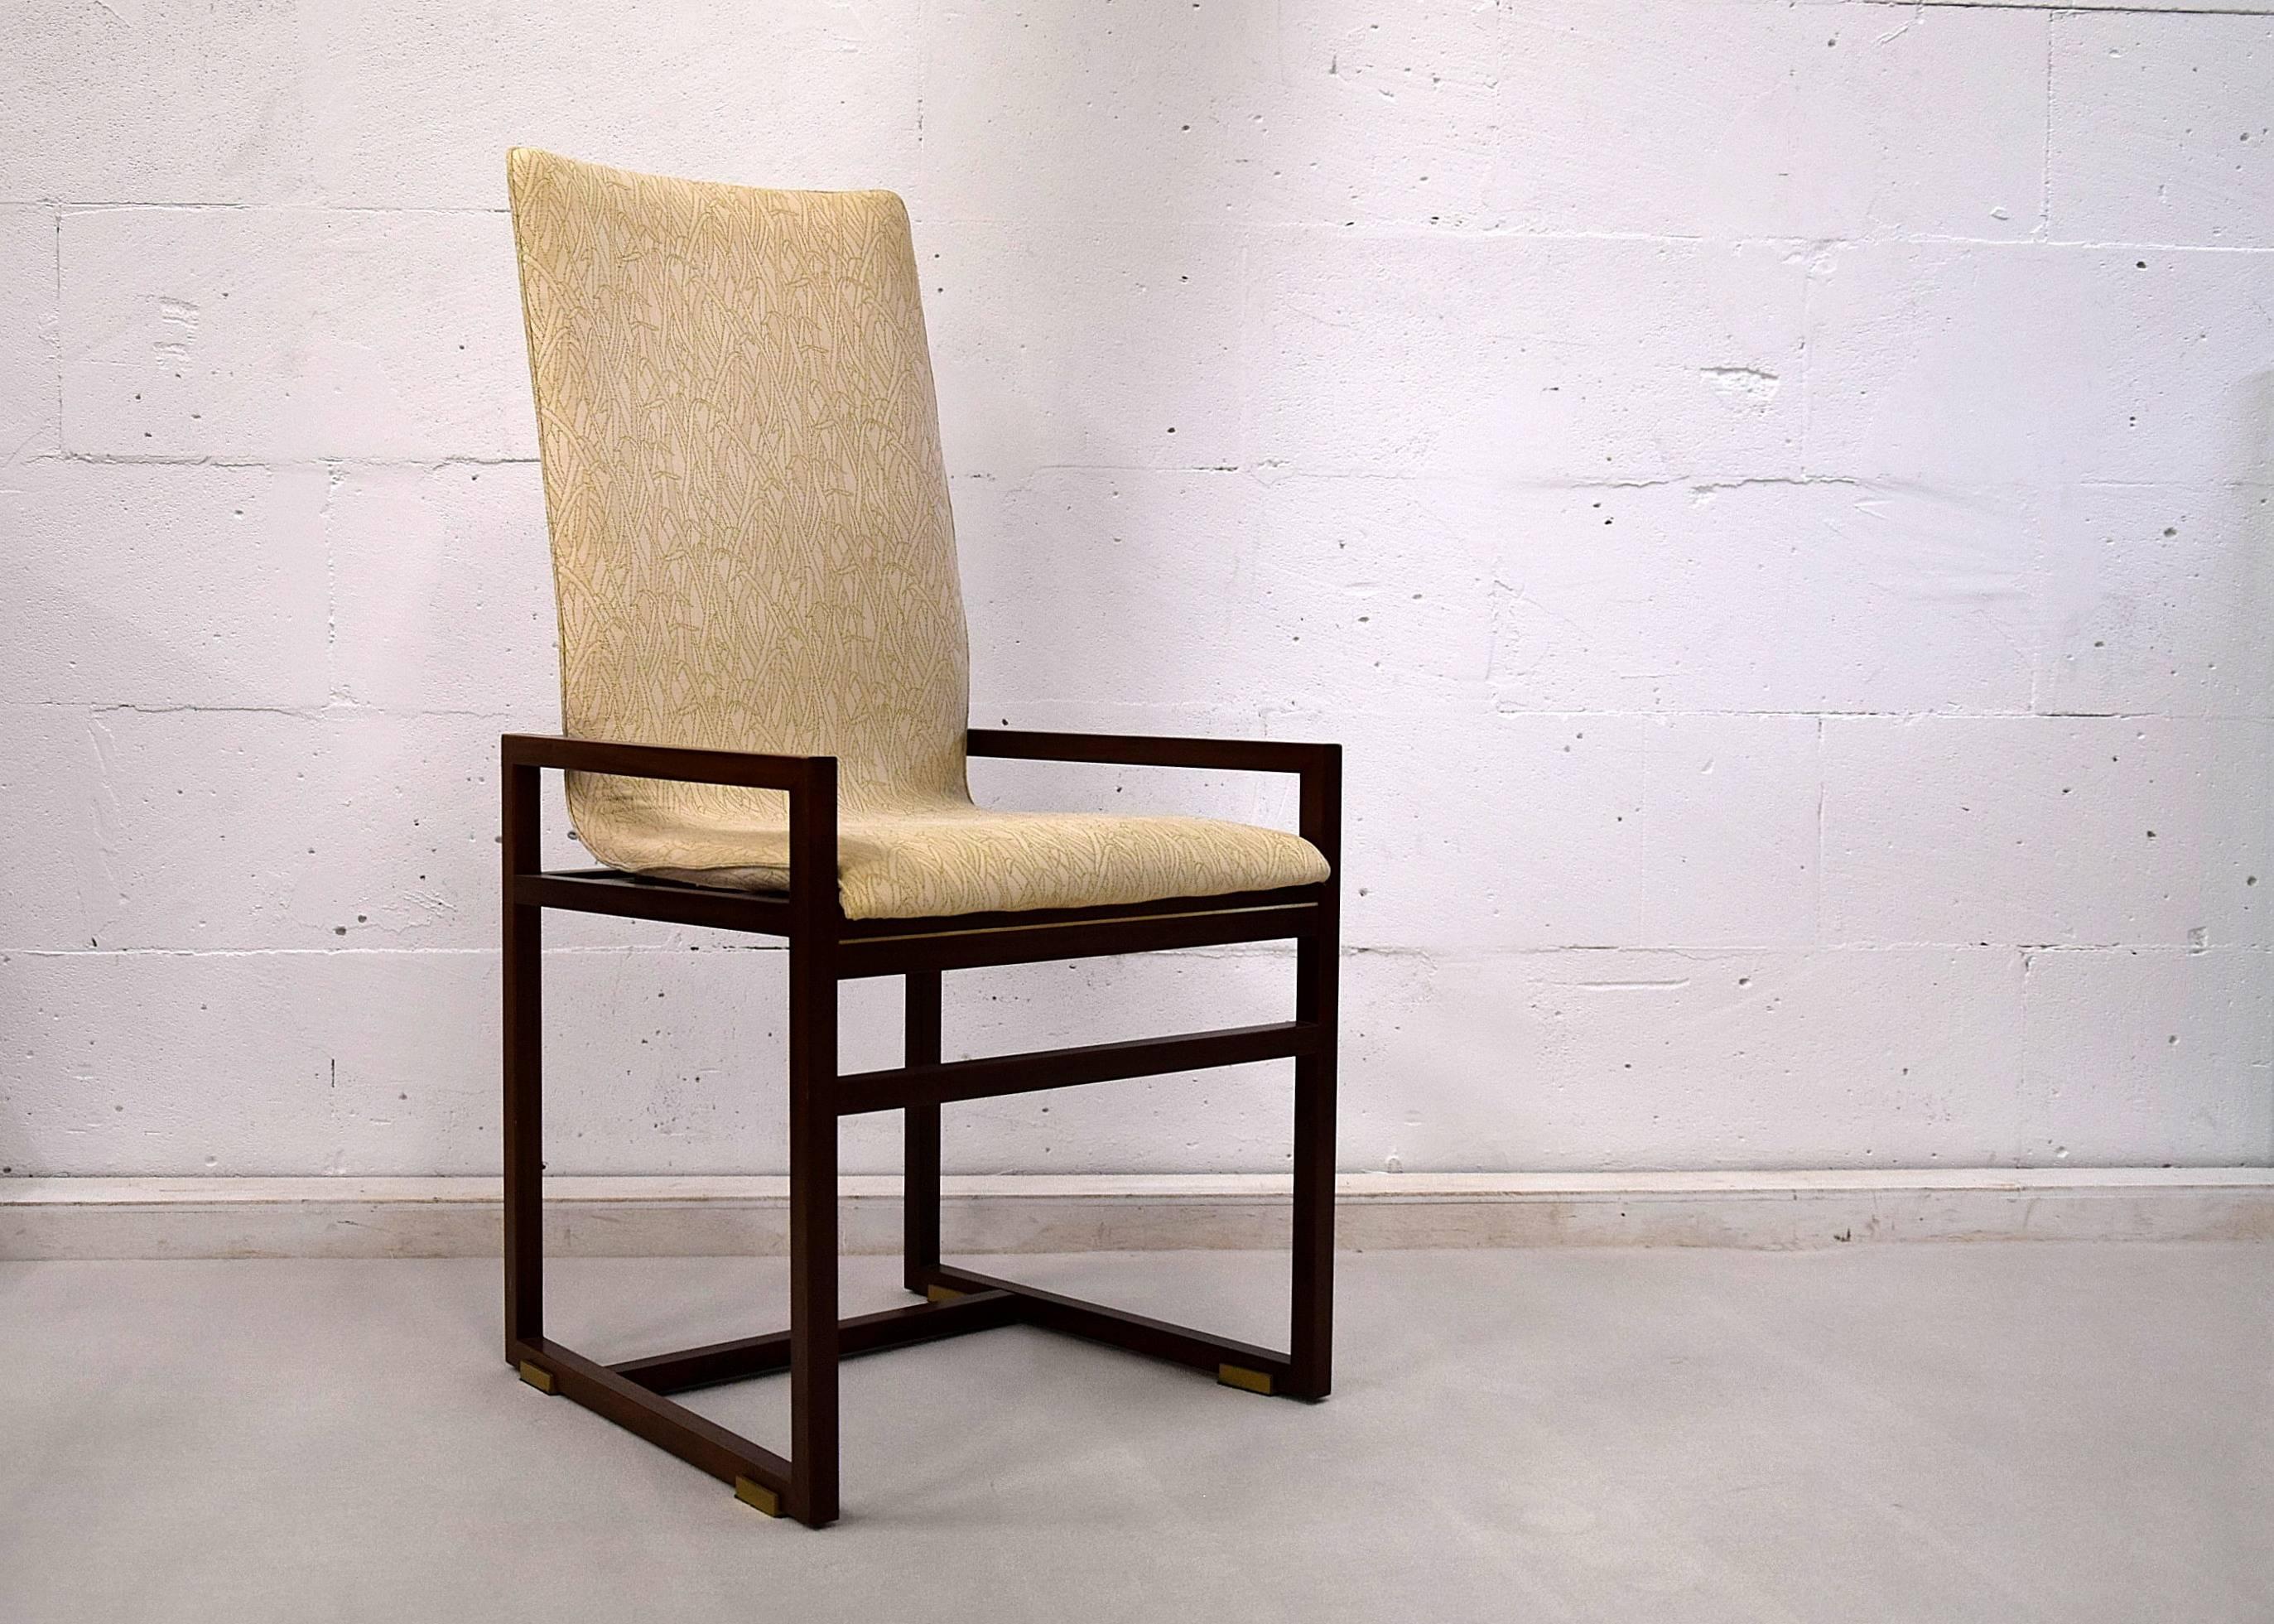 Six elegant and sophisticated walnut dining chairs produced by the renown Italian furniture manufacturer Saporiti.

The chairs are in great condition but I would re-upholster them.

The chairs will be shipped abroad disassembled, seats will be